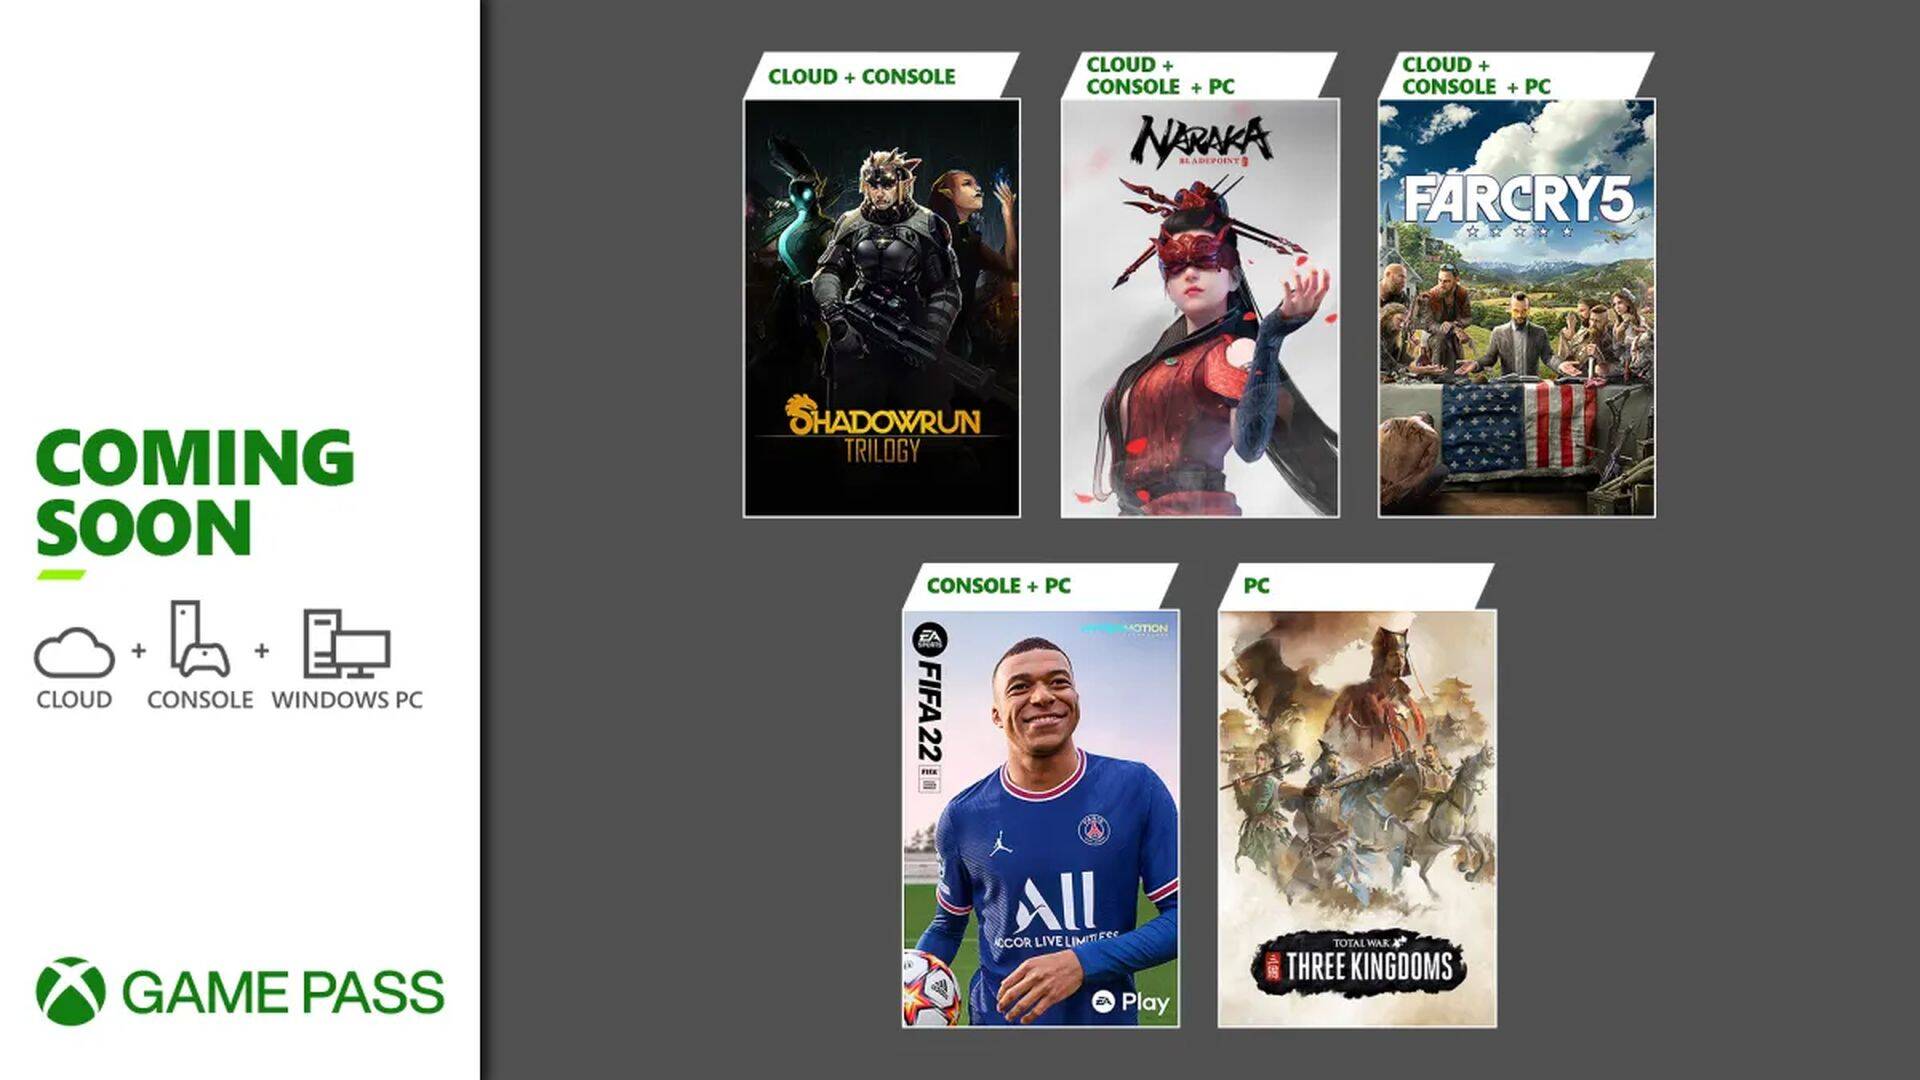 Xbox Game Pass June 2022: announced the free games of the second half of the month